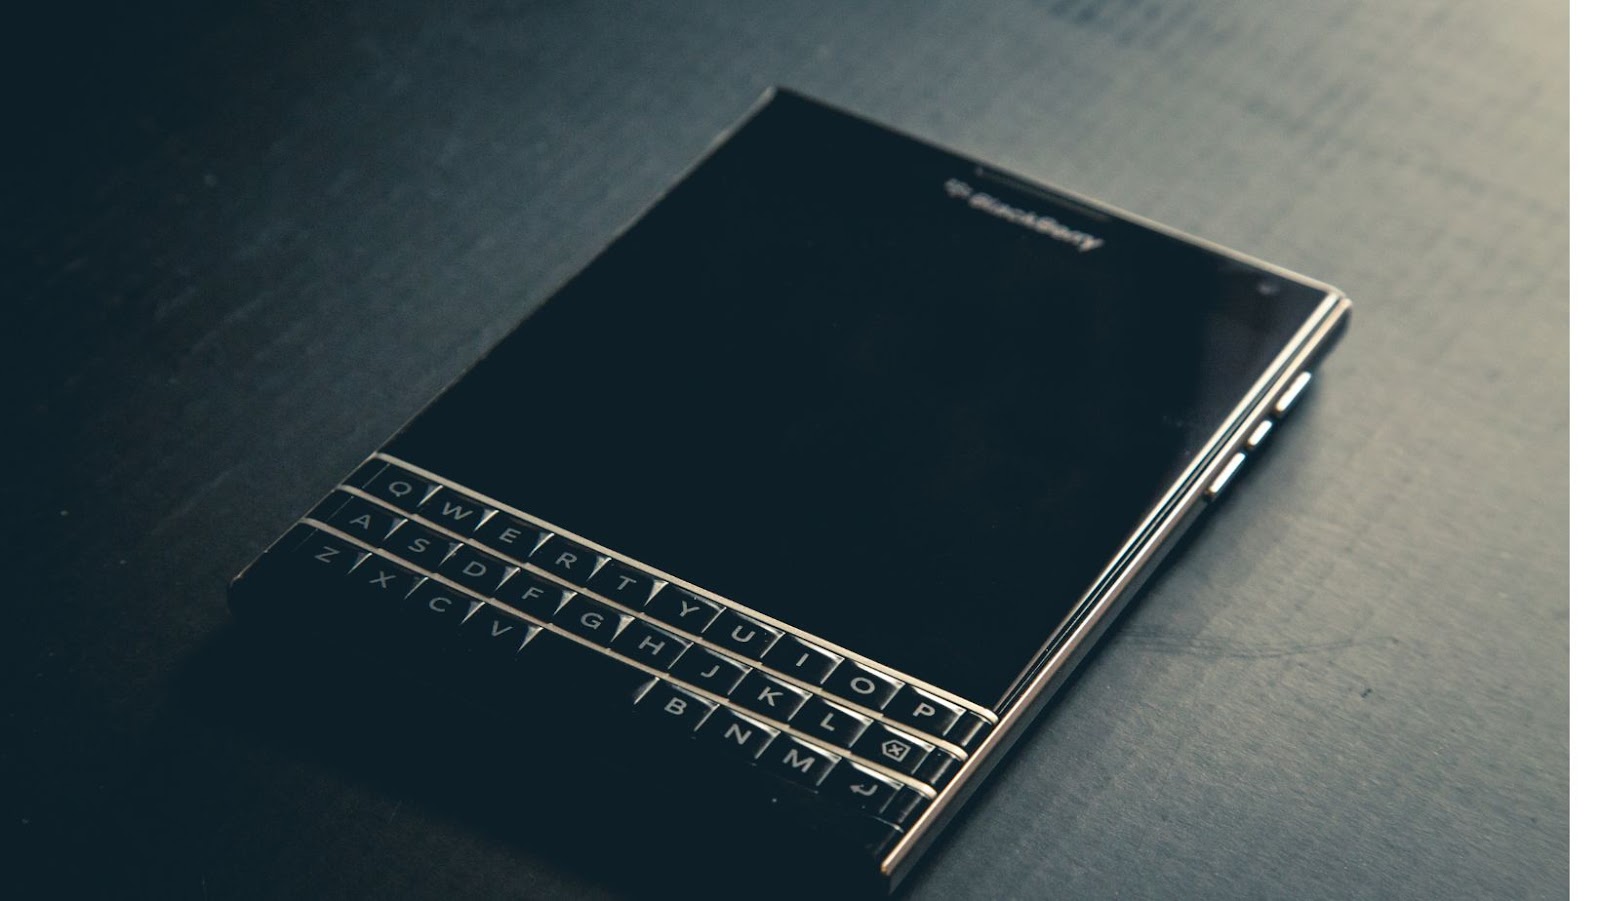 Catapult IP’s Plans For The BlackBerry Patents